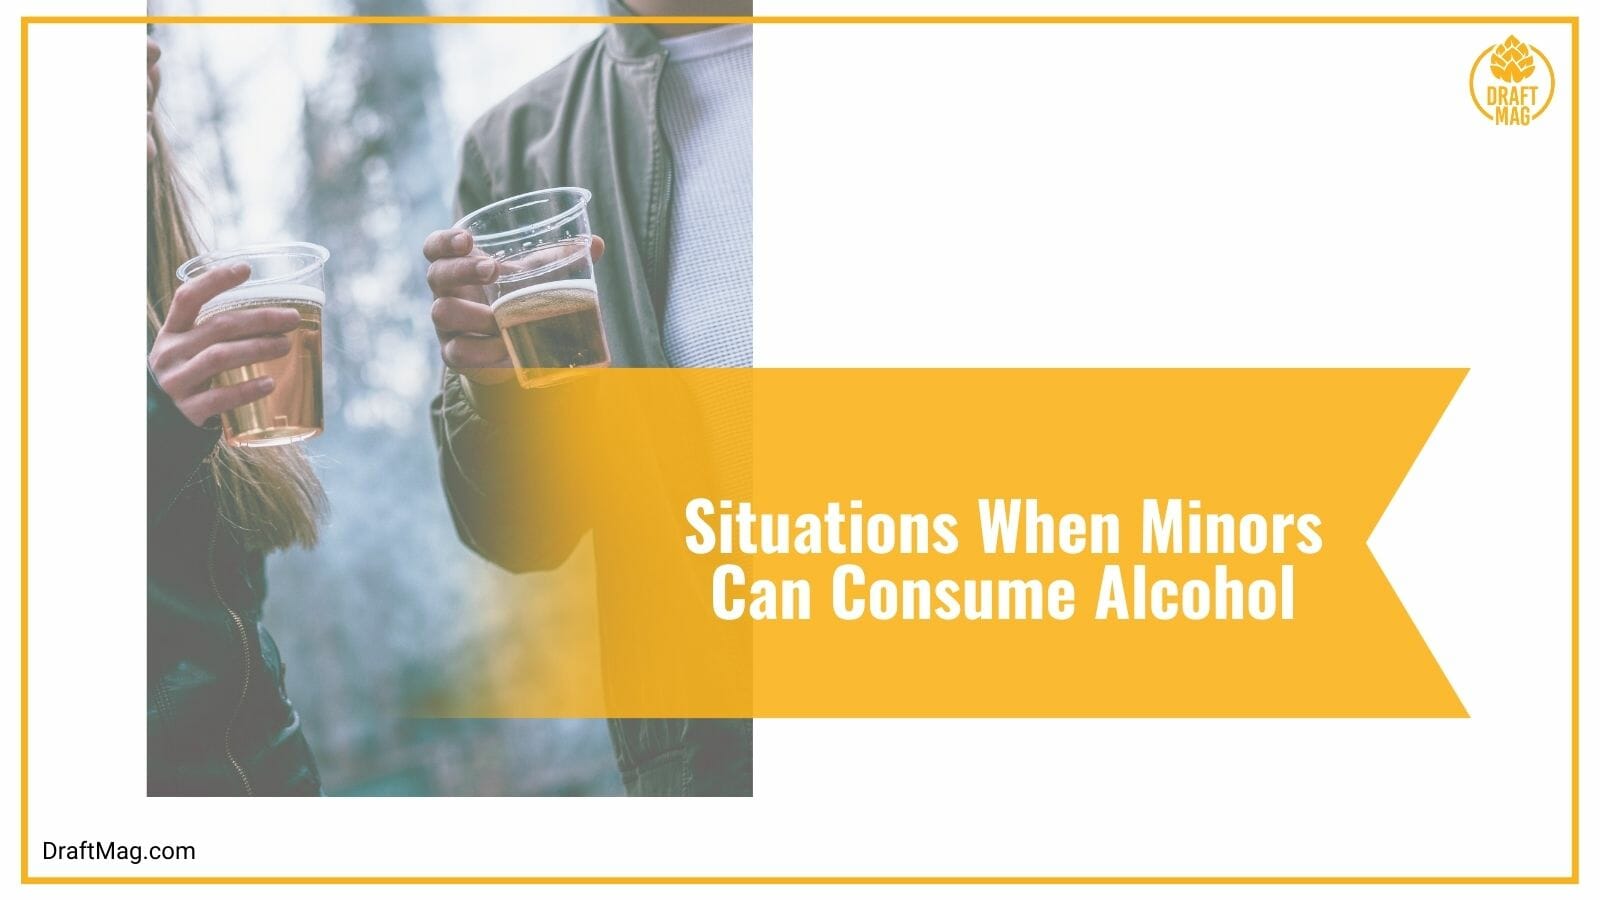 Situations When Minors Can Consume Alcohol